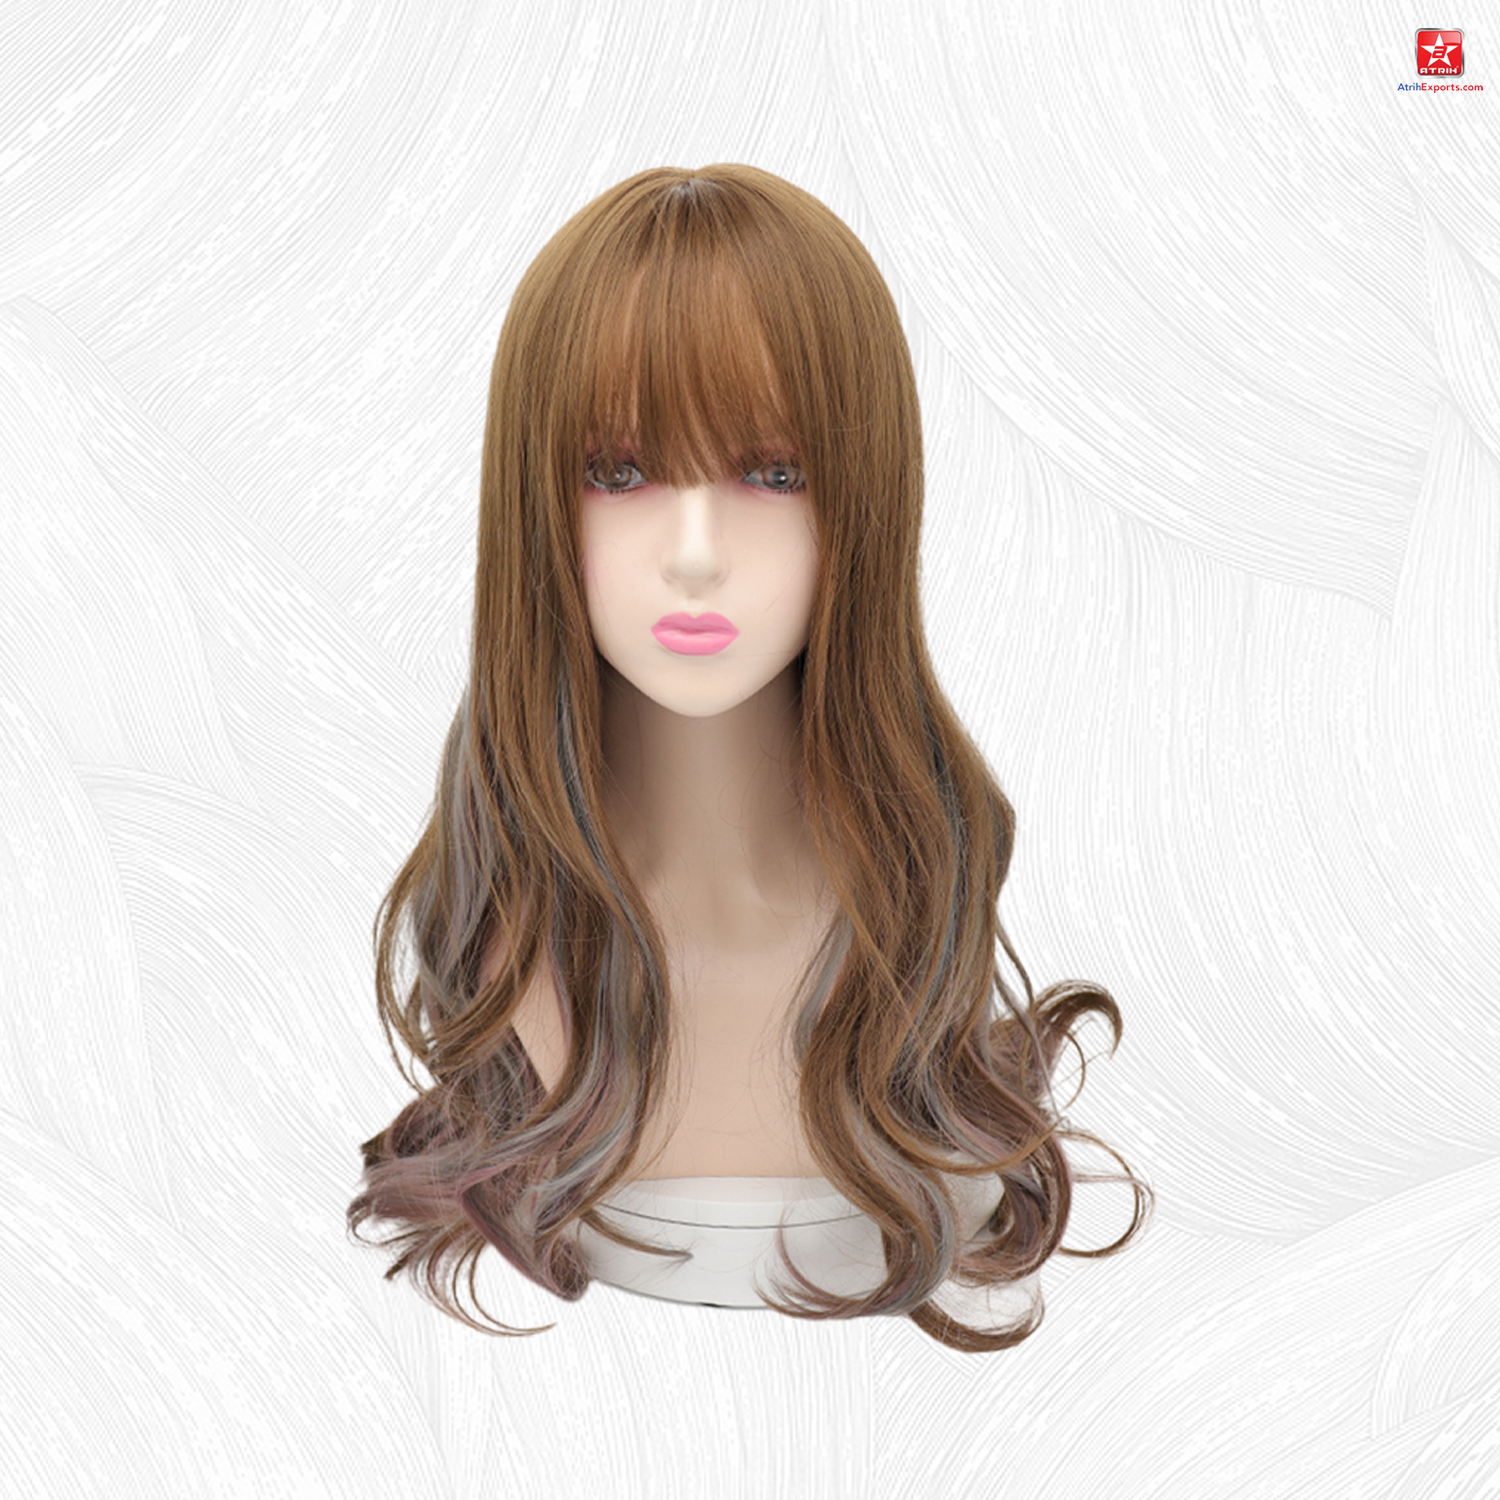 Wigs Human Hair Lace Front Long Curly Brown Wigs For Women with Bangs Wave Heat Resistant Synthetic Wigs Soft Natural Looking